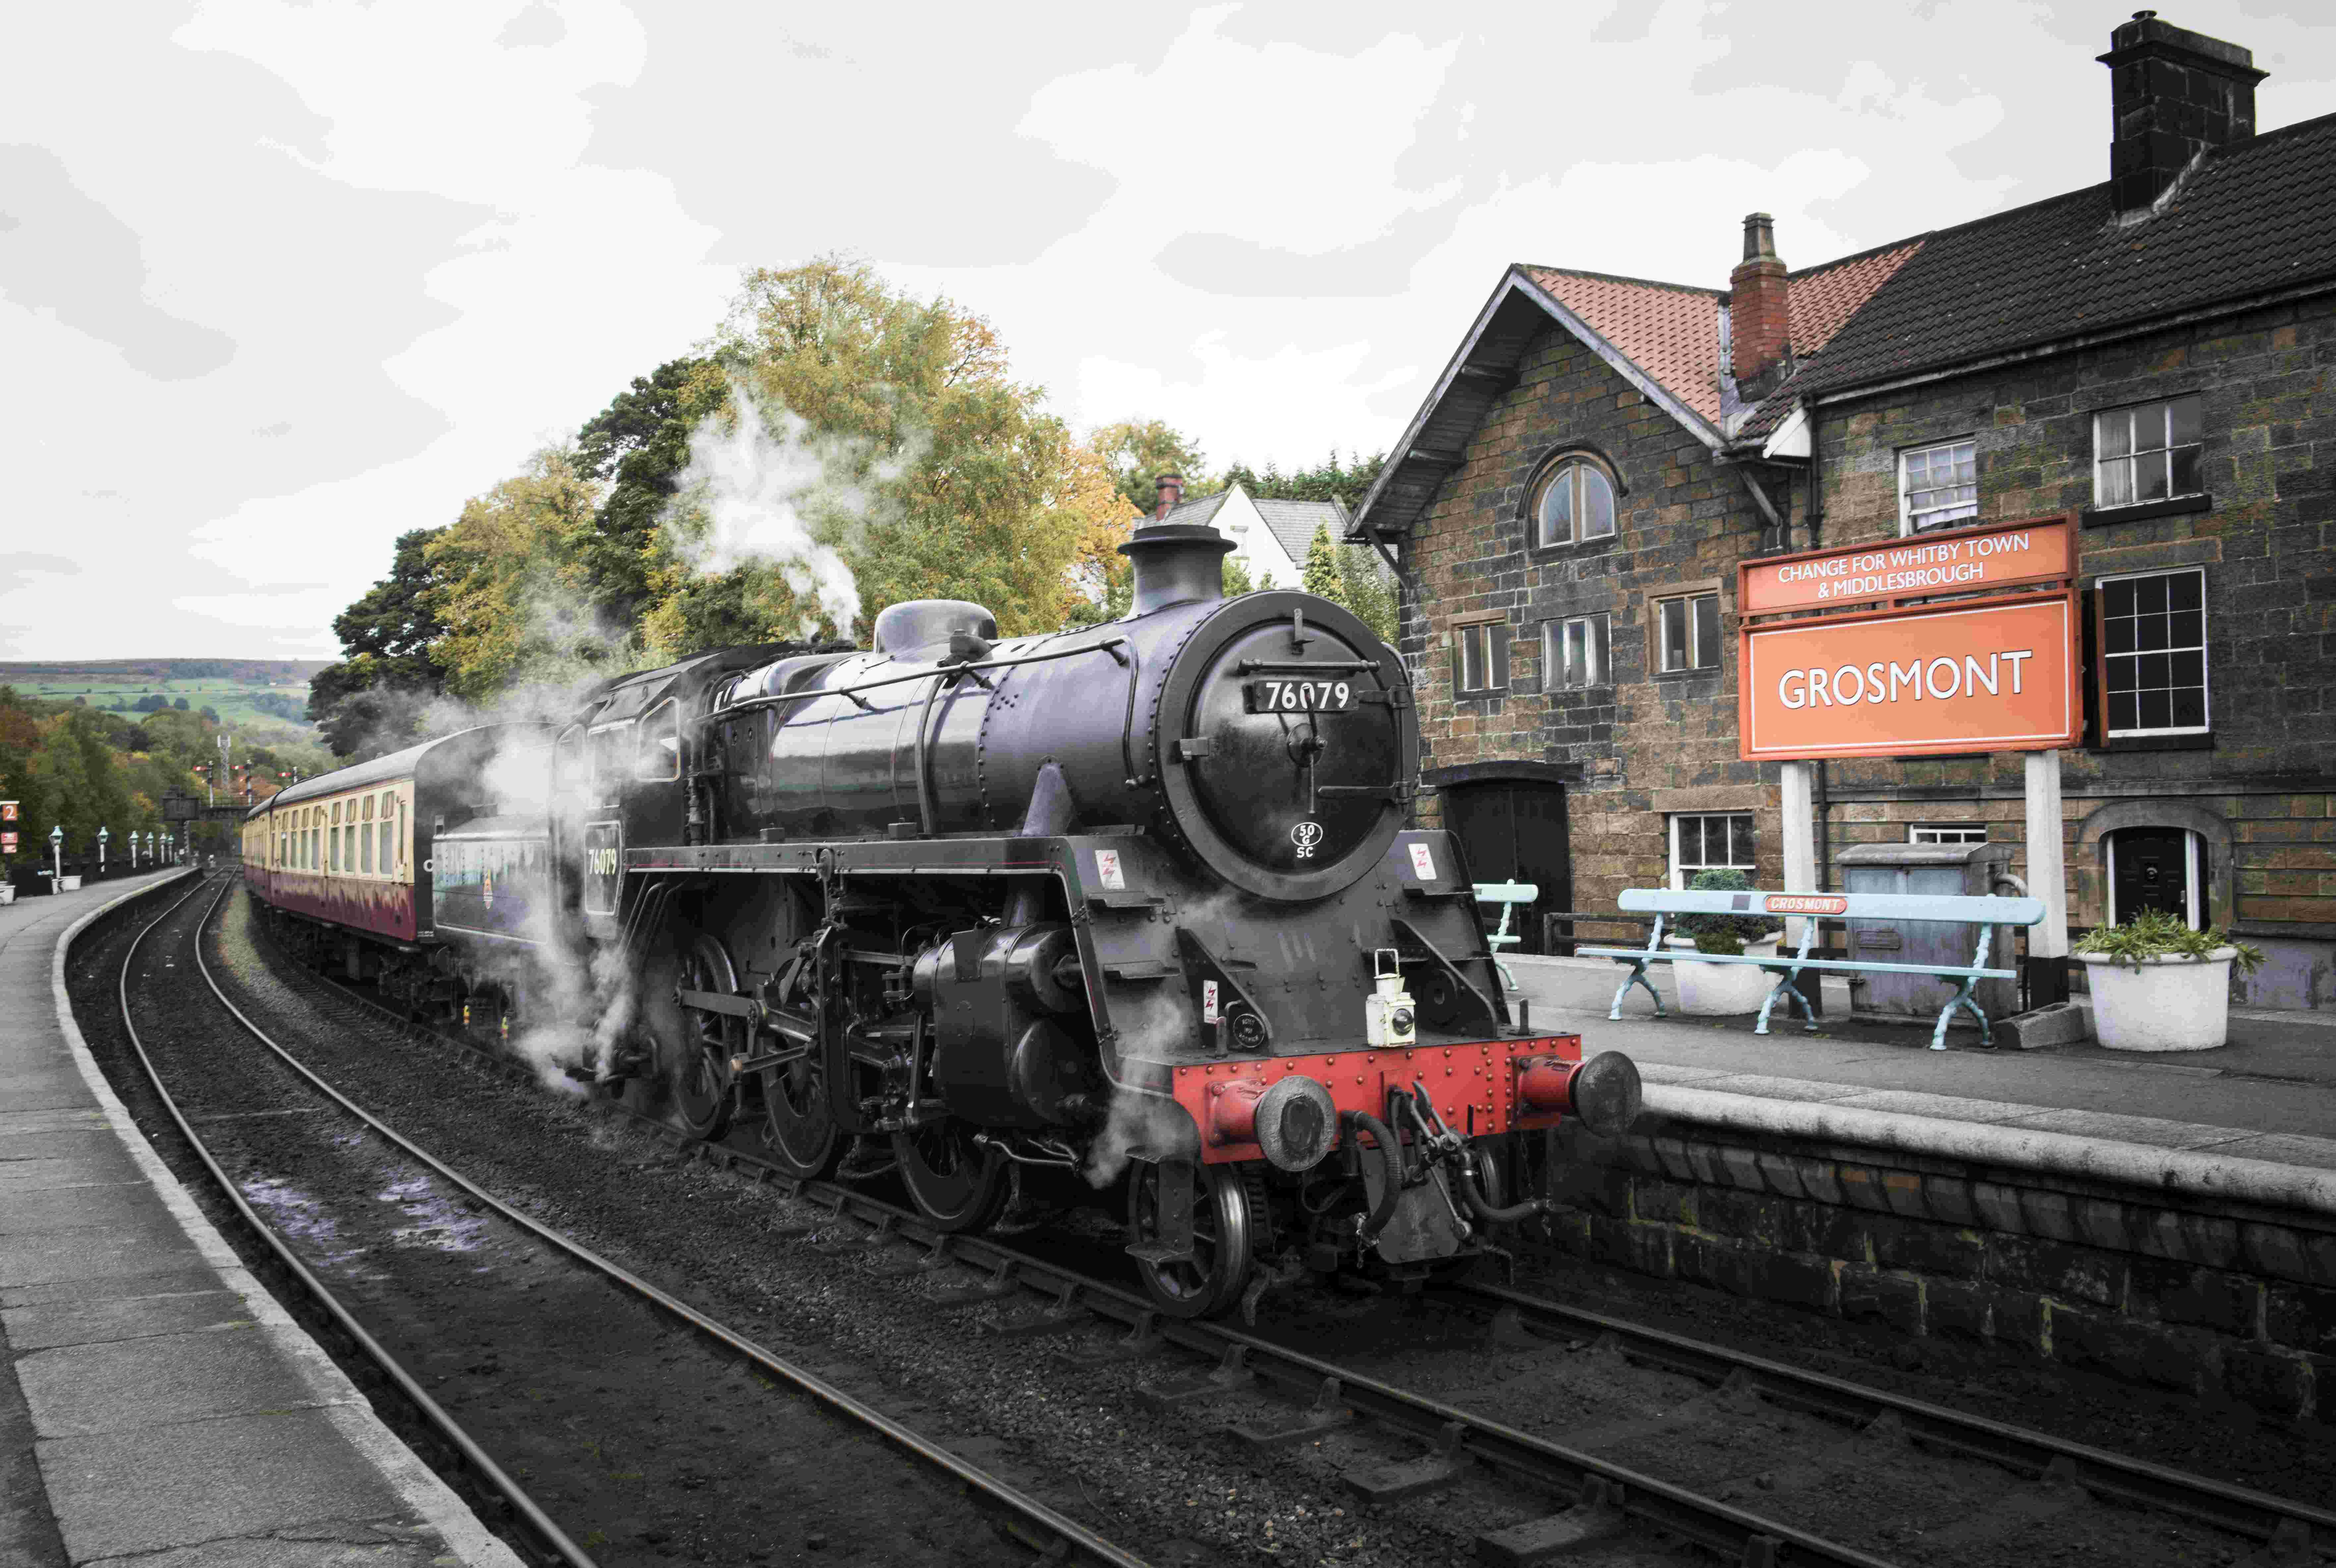 North Yorkshire Moors Railway has provided a location for numerous hit films